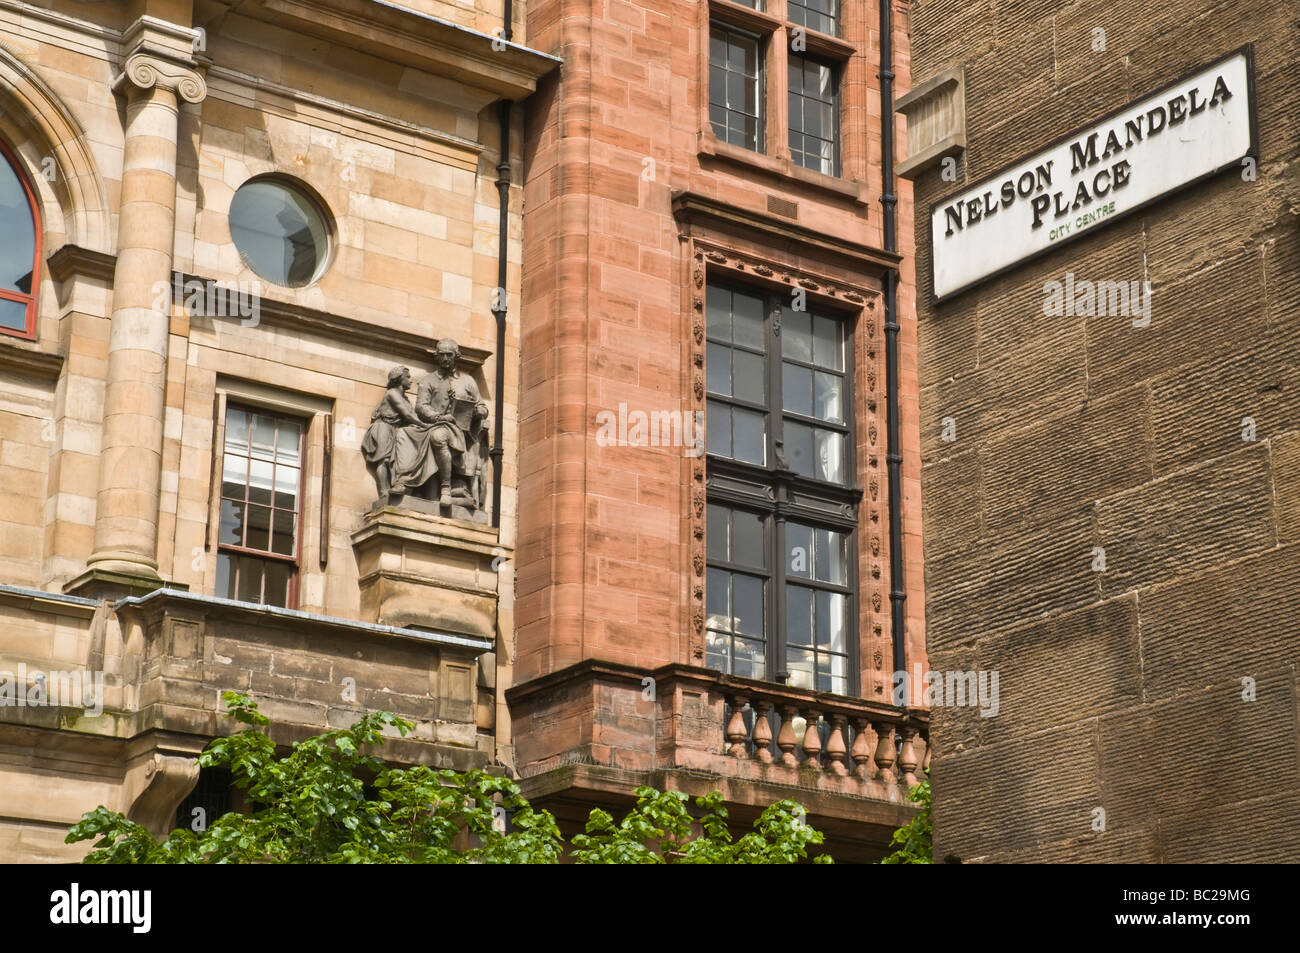 dh Athenaeum NELSON MANDELA PLACE GLASGOW Street sign and the Athenaeum building statues Stock Photo